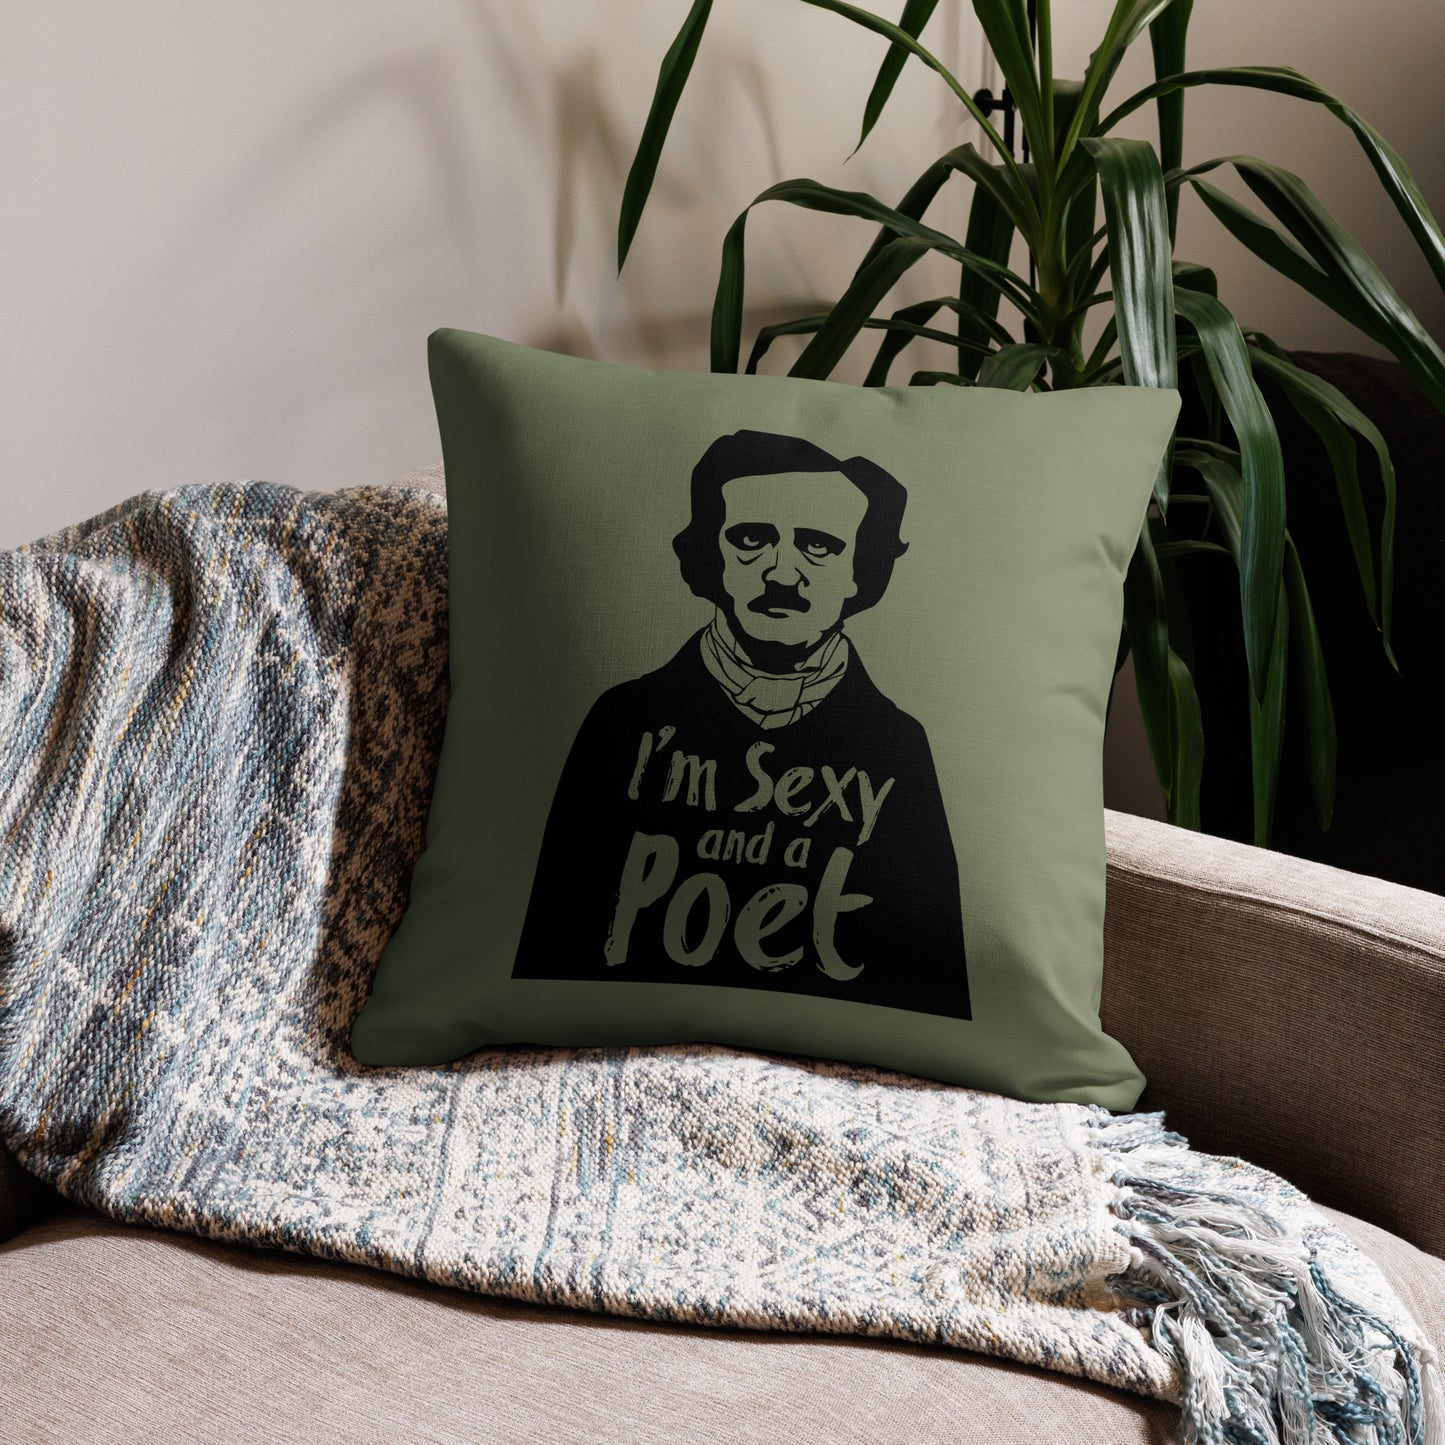 Products Edgar Allan Poe "I'm Sexy and a Poet" Premium Pillow - Green 22 x 22